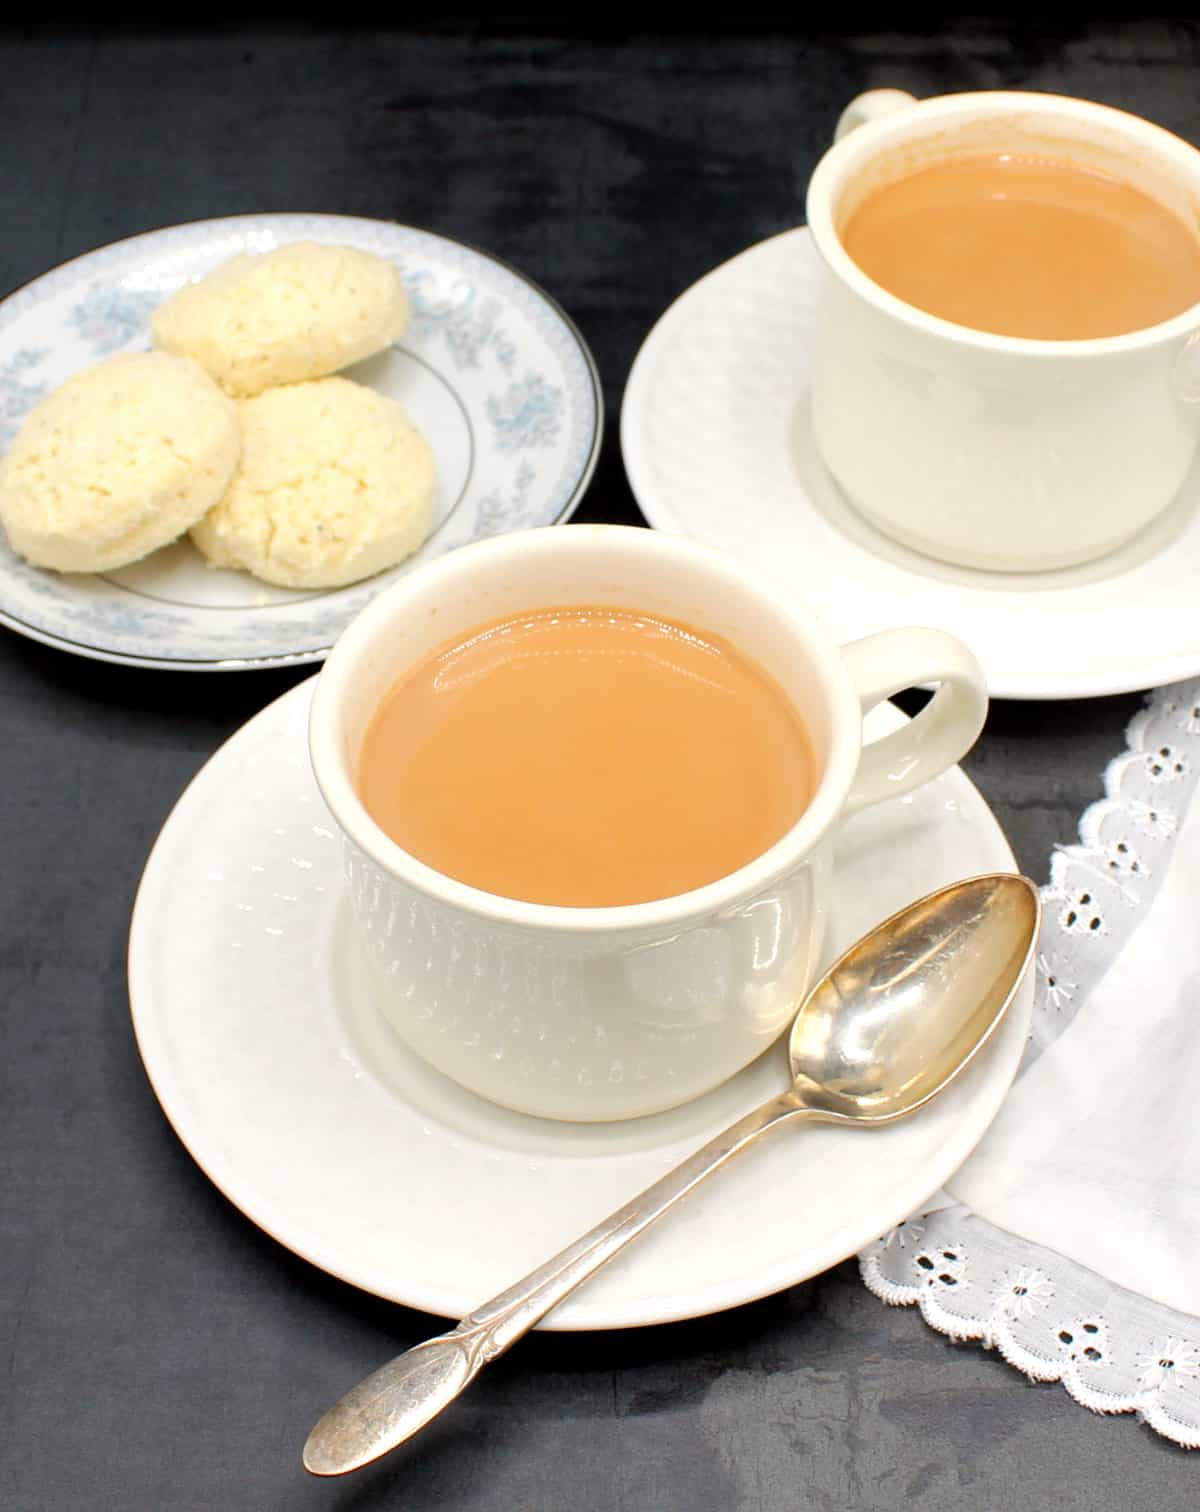 Masala chai tea in cups with a plate of cookies.